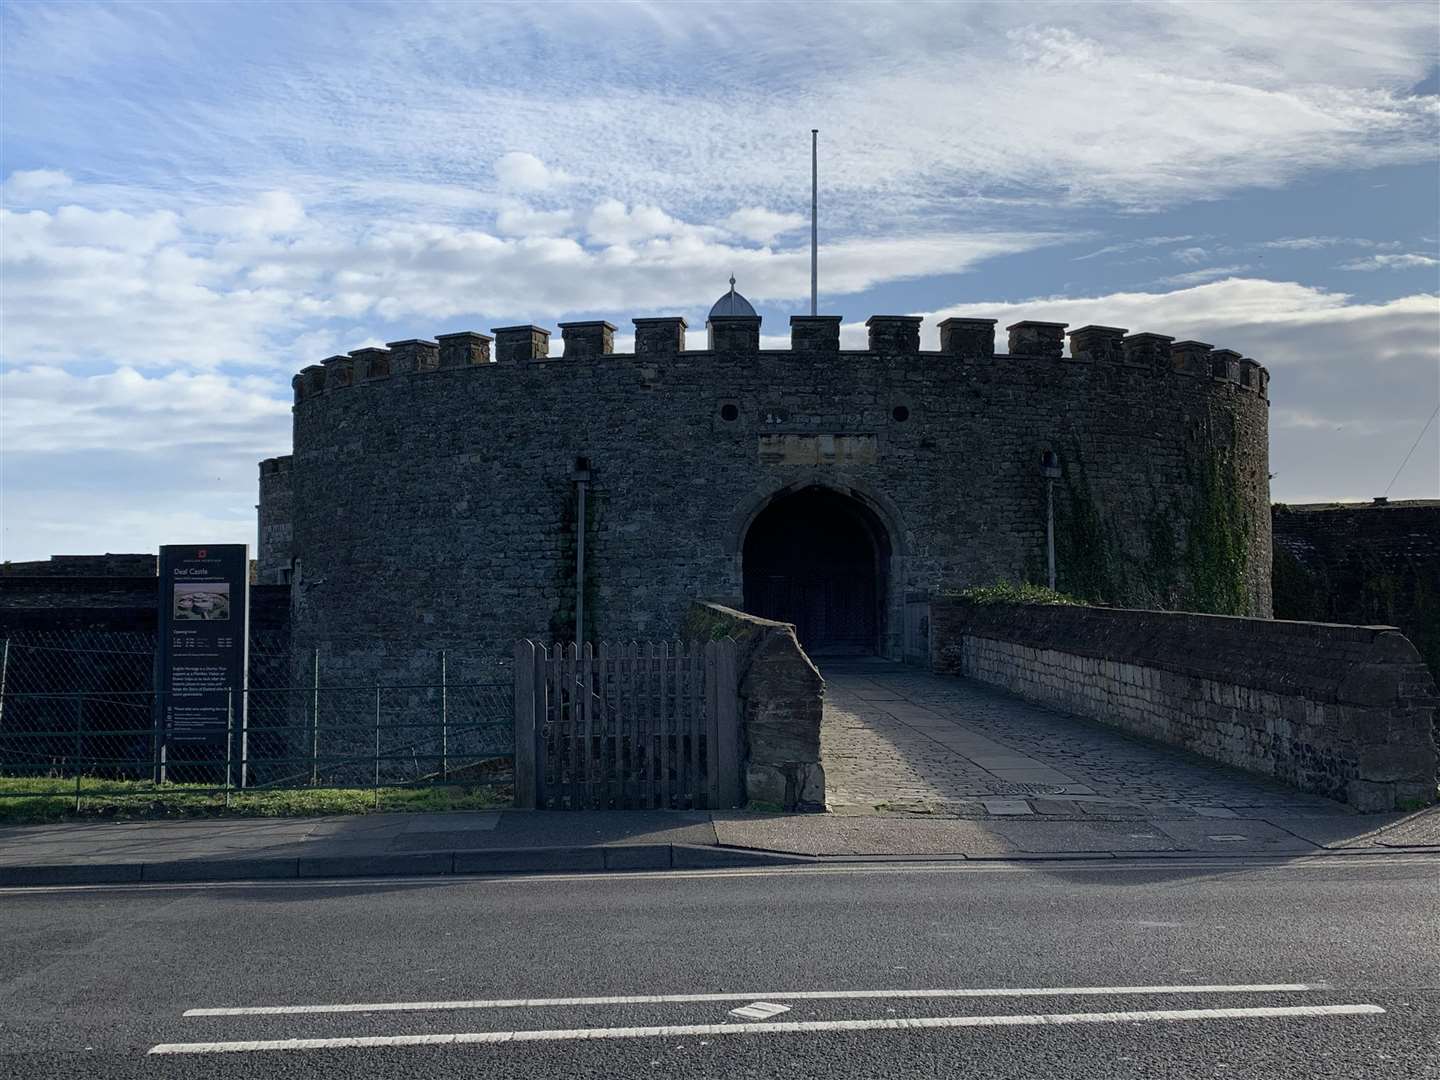 Deal Castle will open for the first time on Saturday, August 1